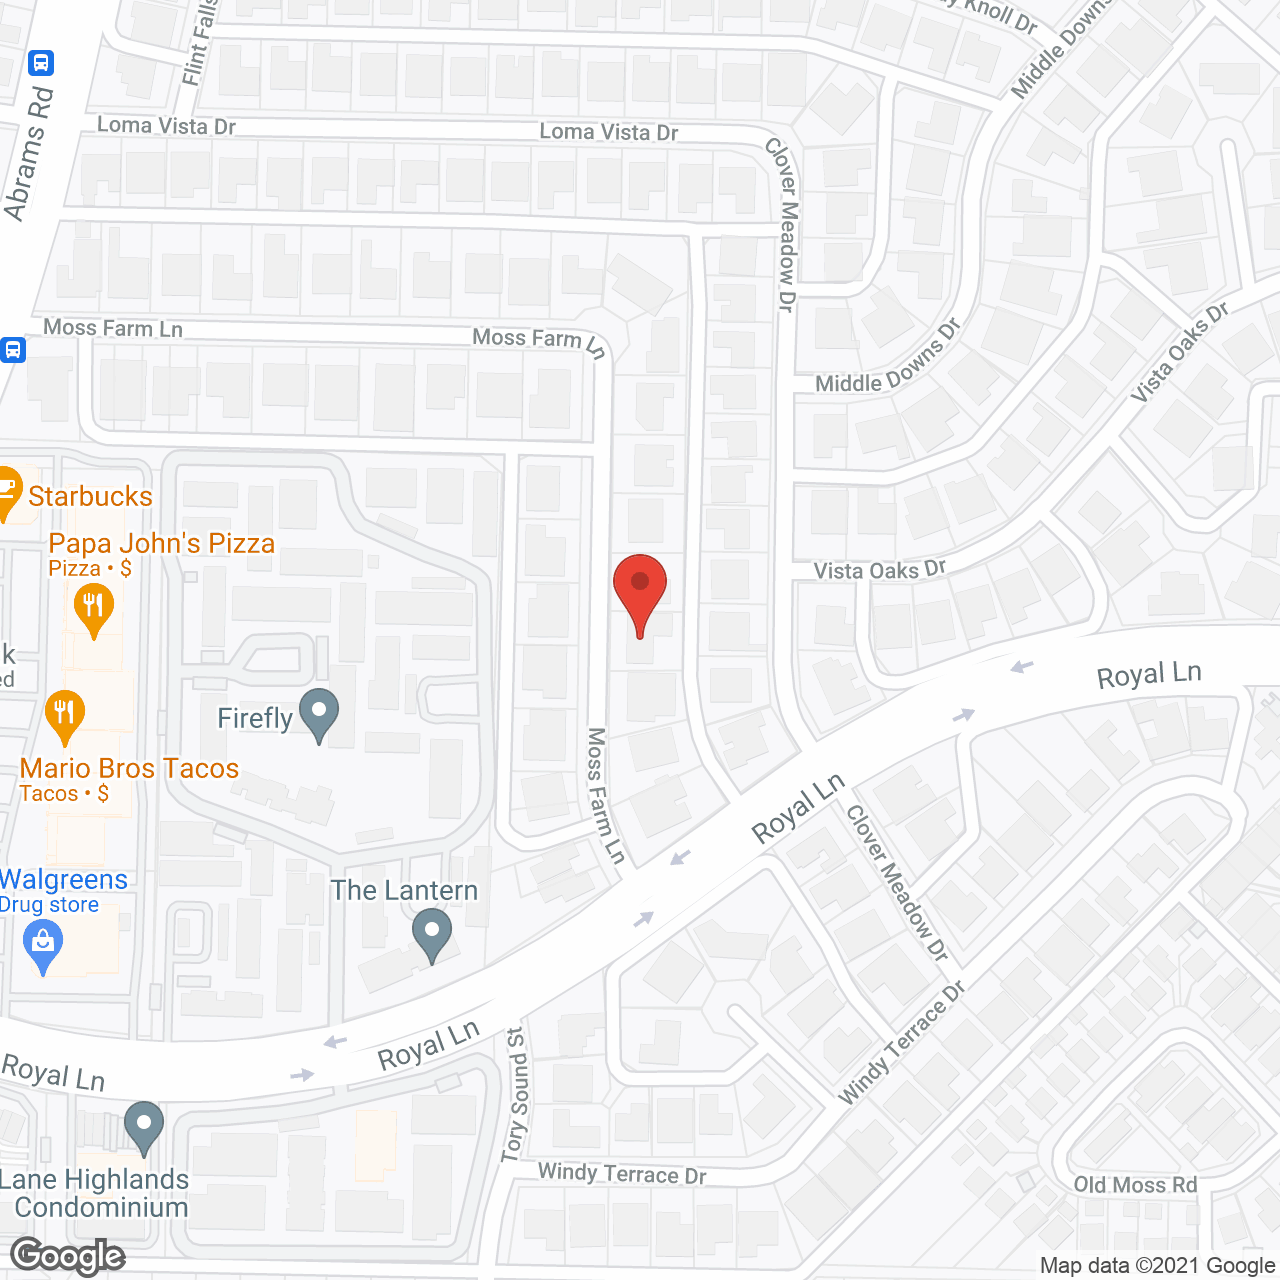 Chandler Way Assisted Living in google map